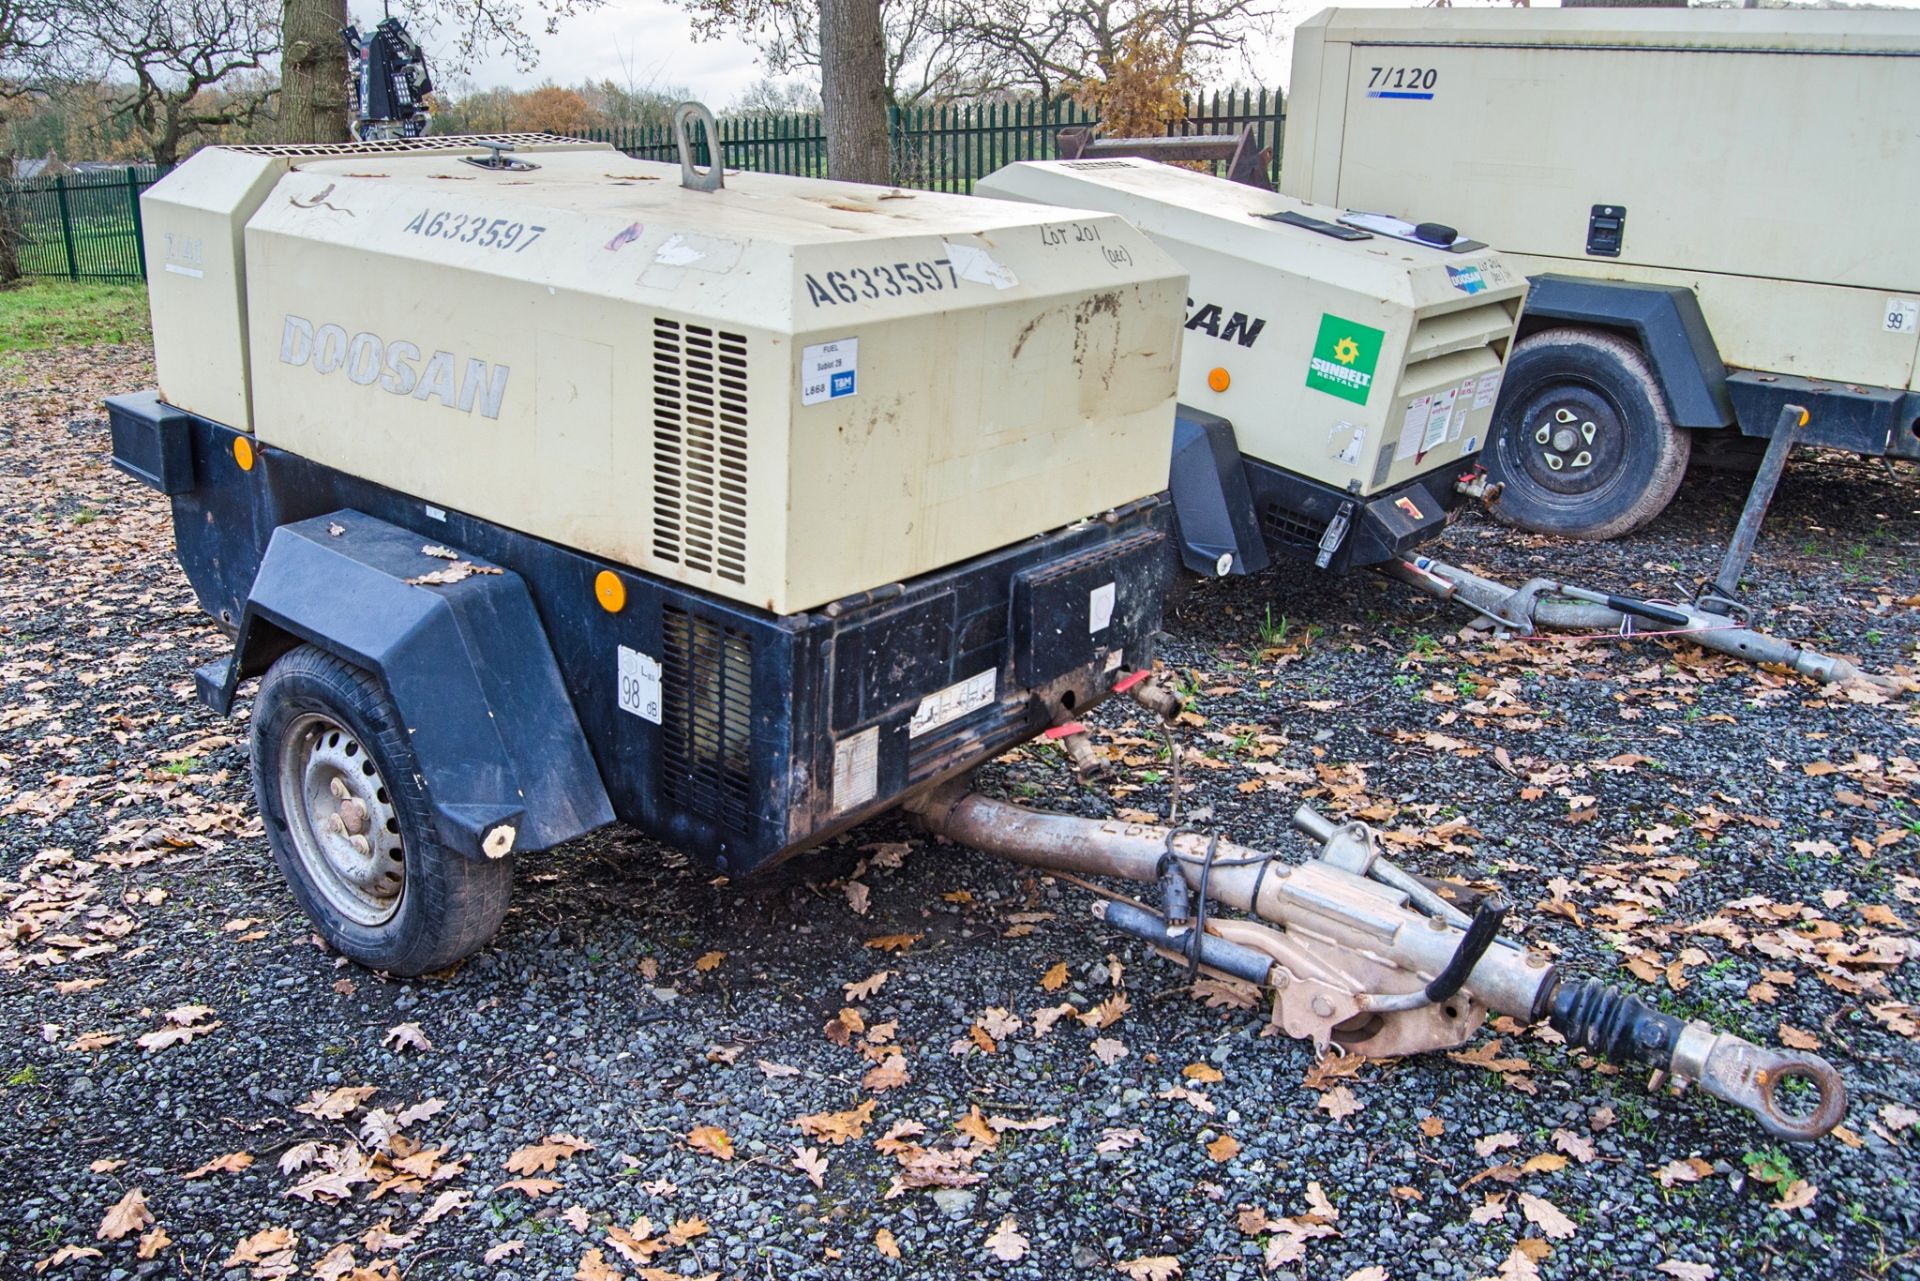 Doosan 7/41 diesel driven fast tow mobile air compressor Year: 2014 S/N: 432642 Recorded Hours: - Image 2 of 11